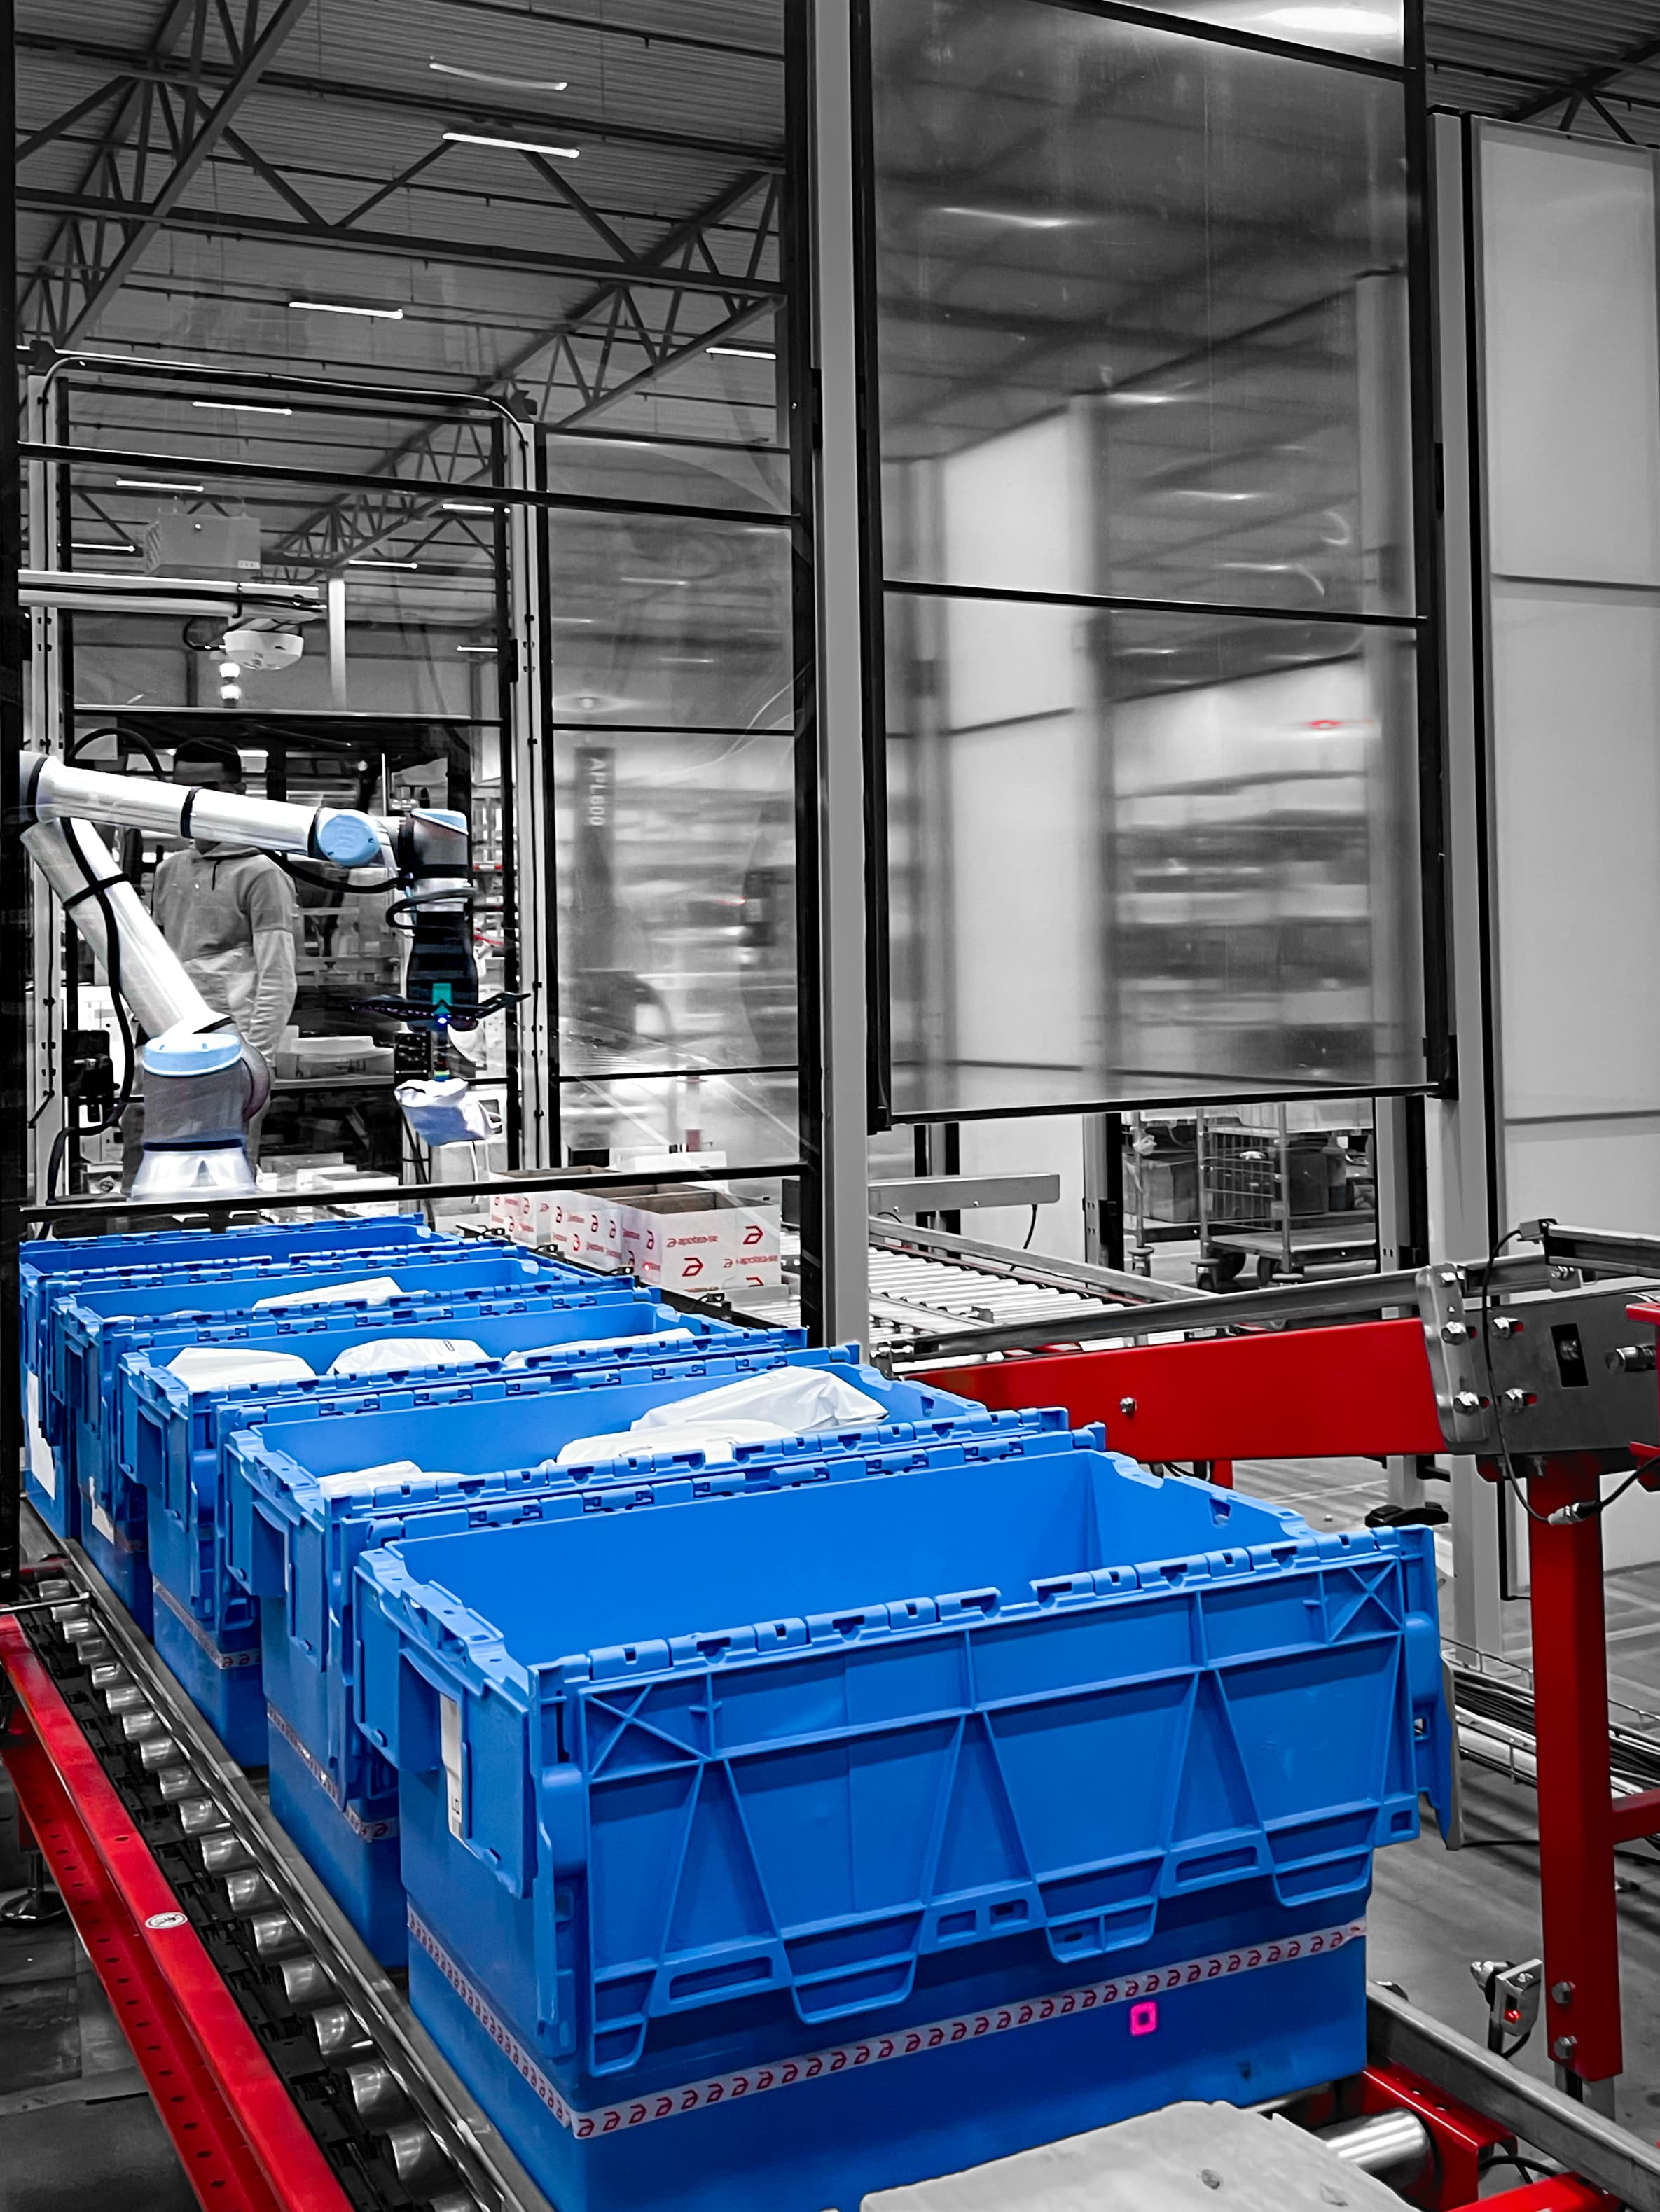 The Latest Article: Apotea deploys rightpick™ 3 item-handling system from righthand robotics™ to expedite operations for consumers